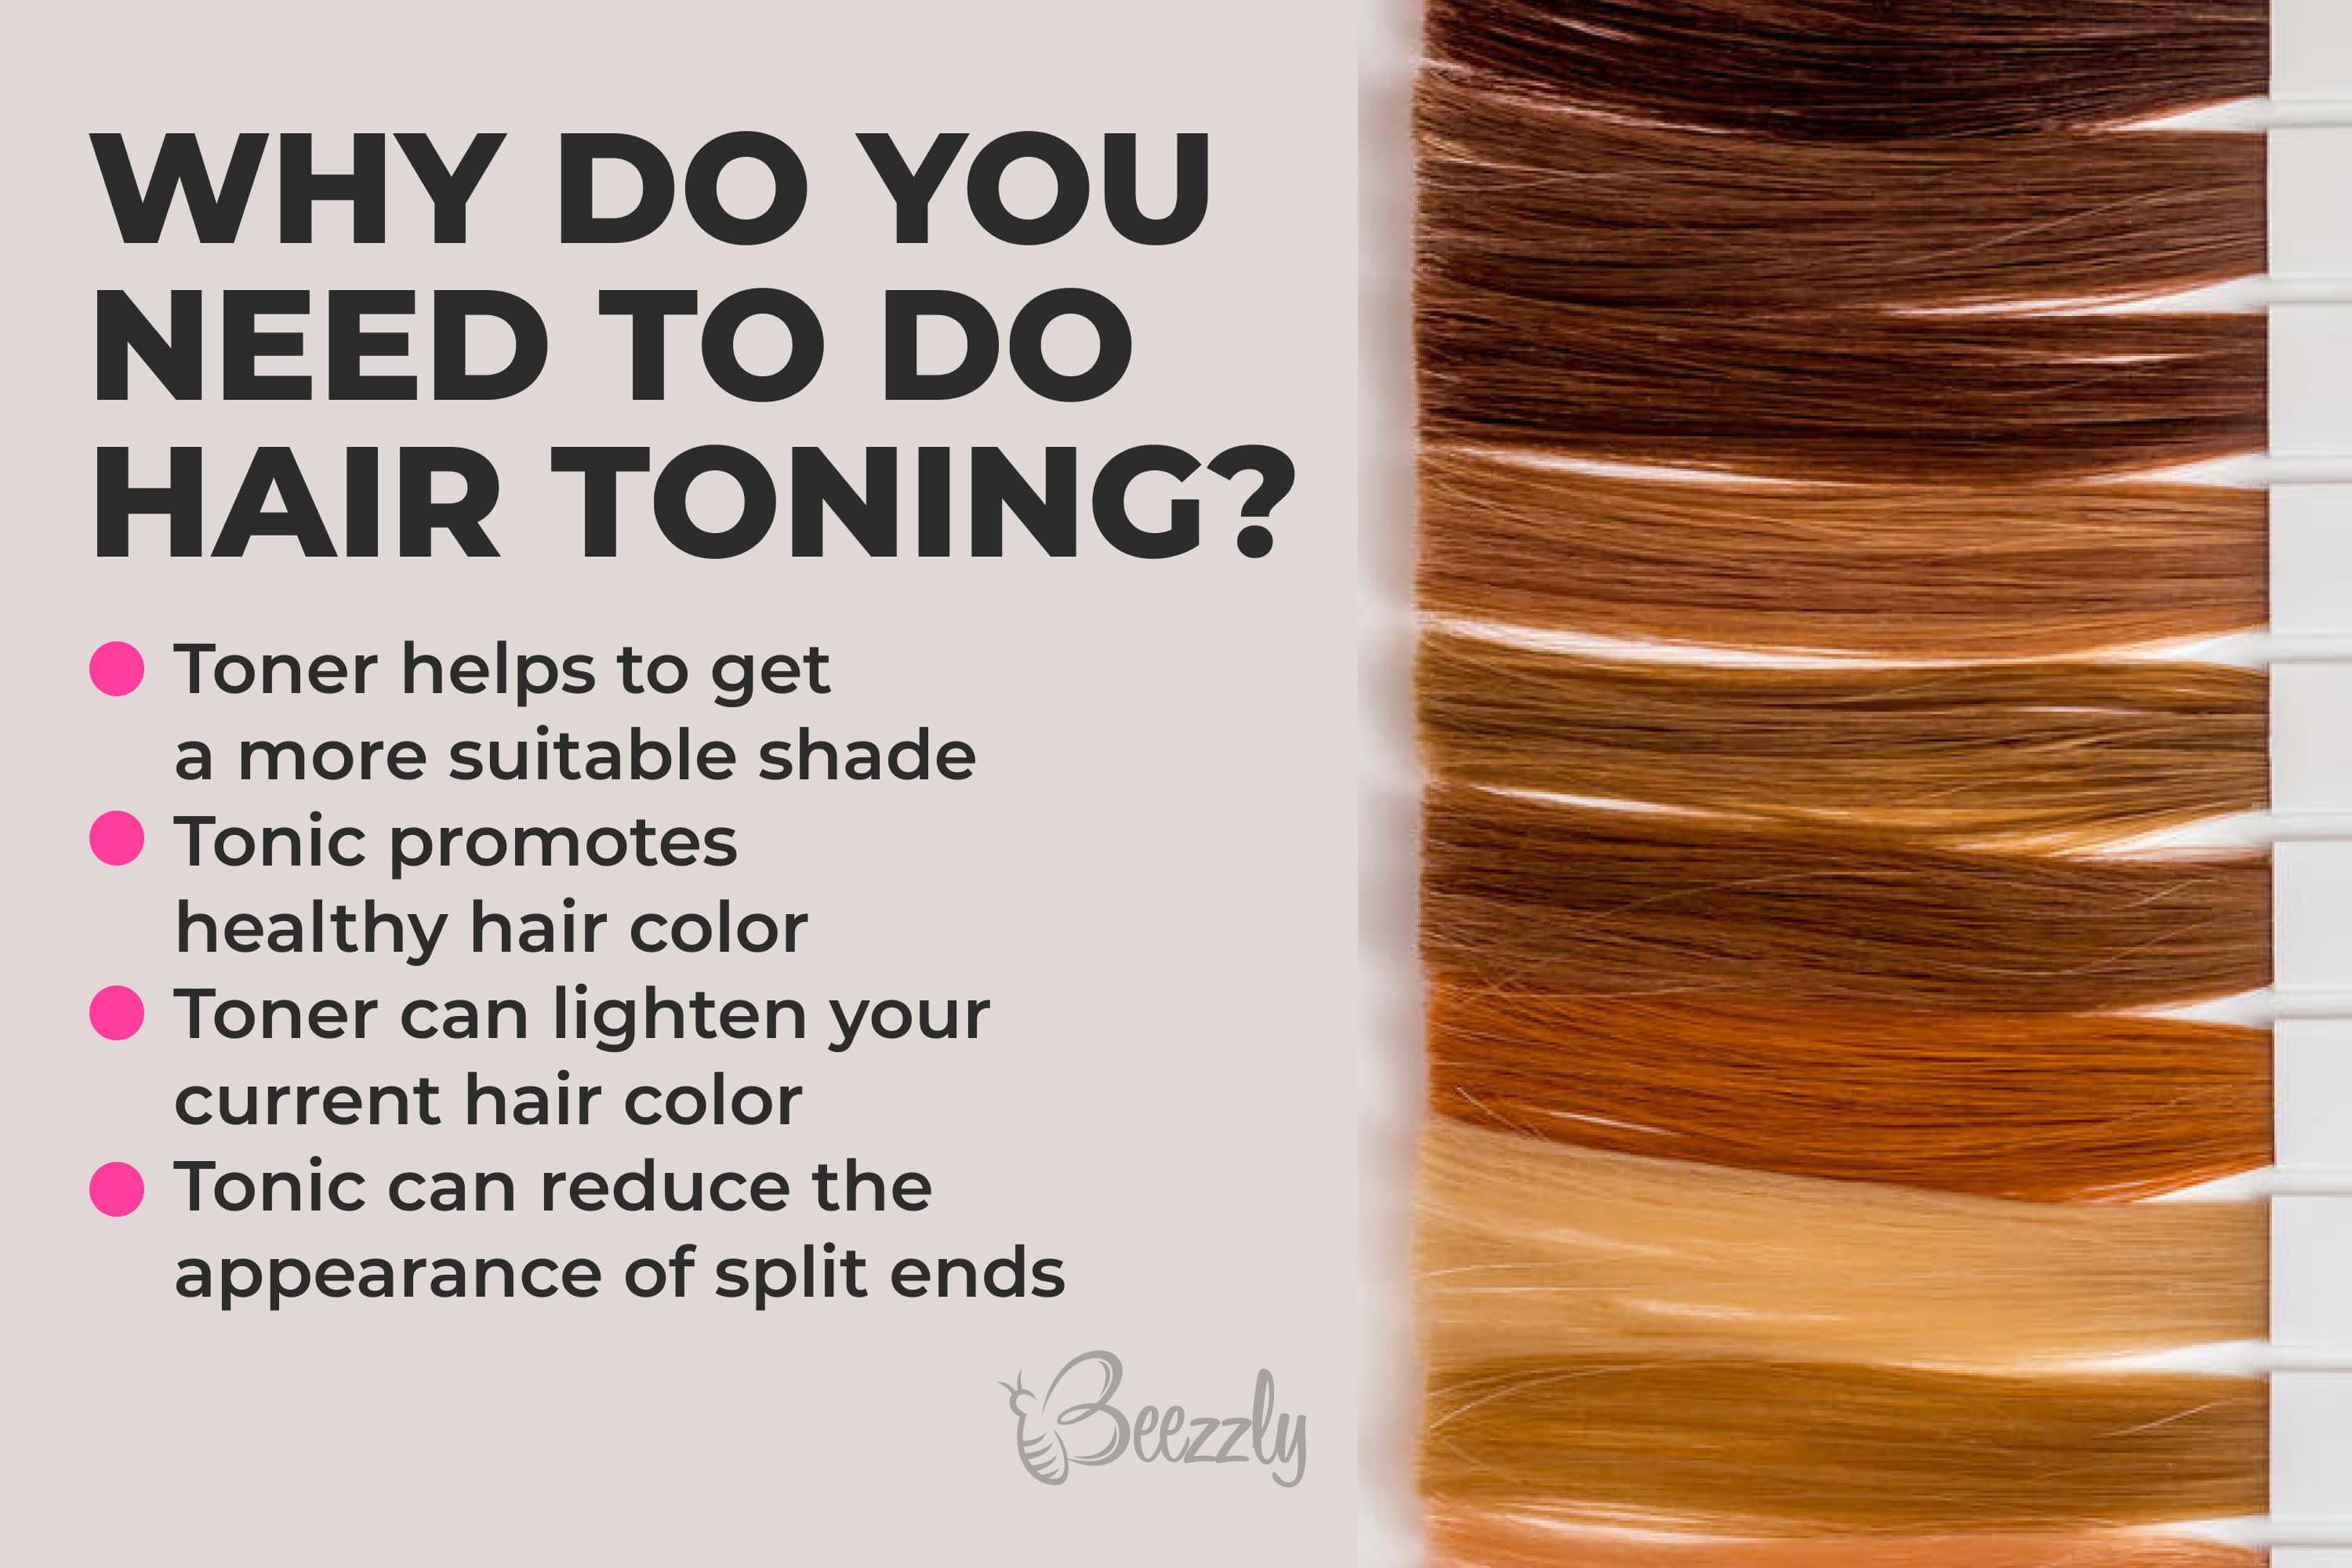 Why do you need to do hair toning